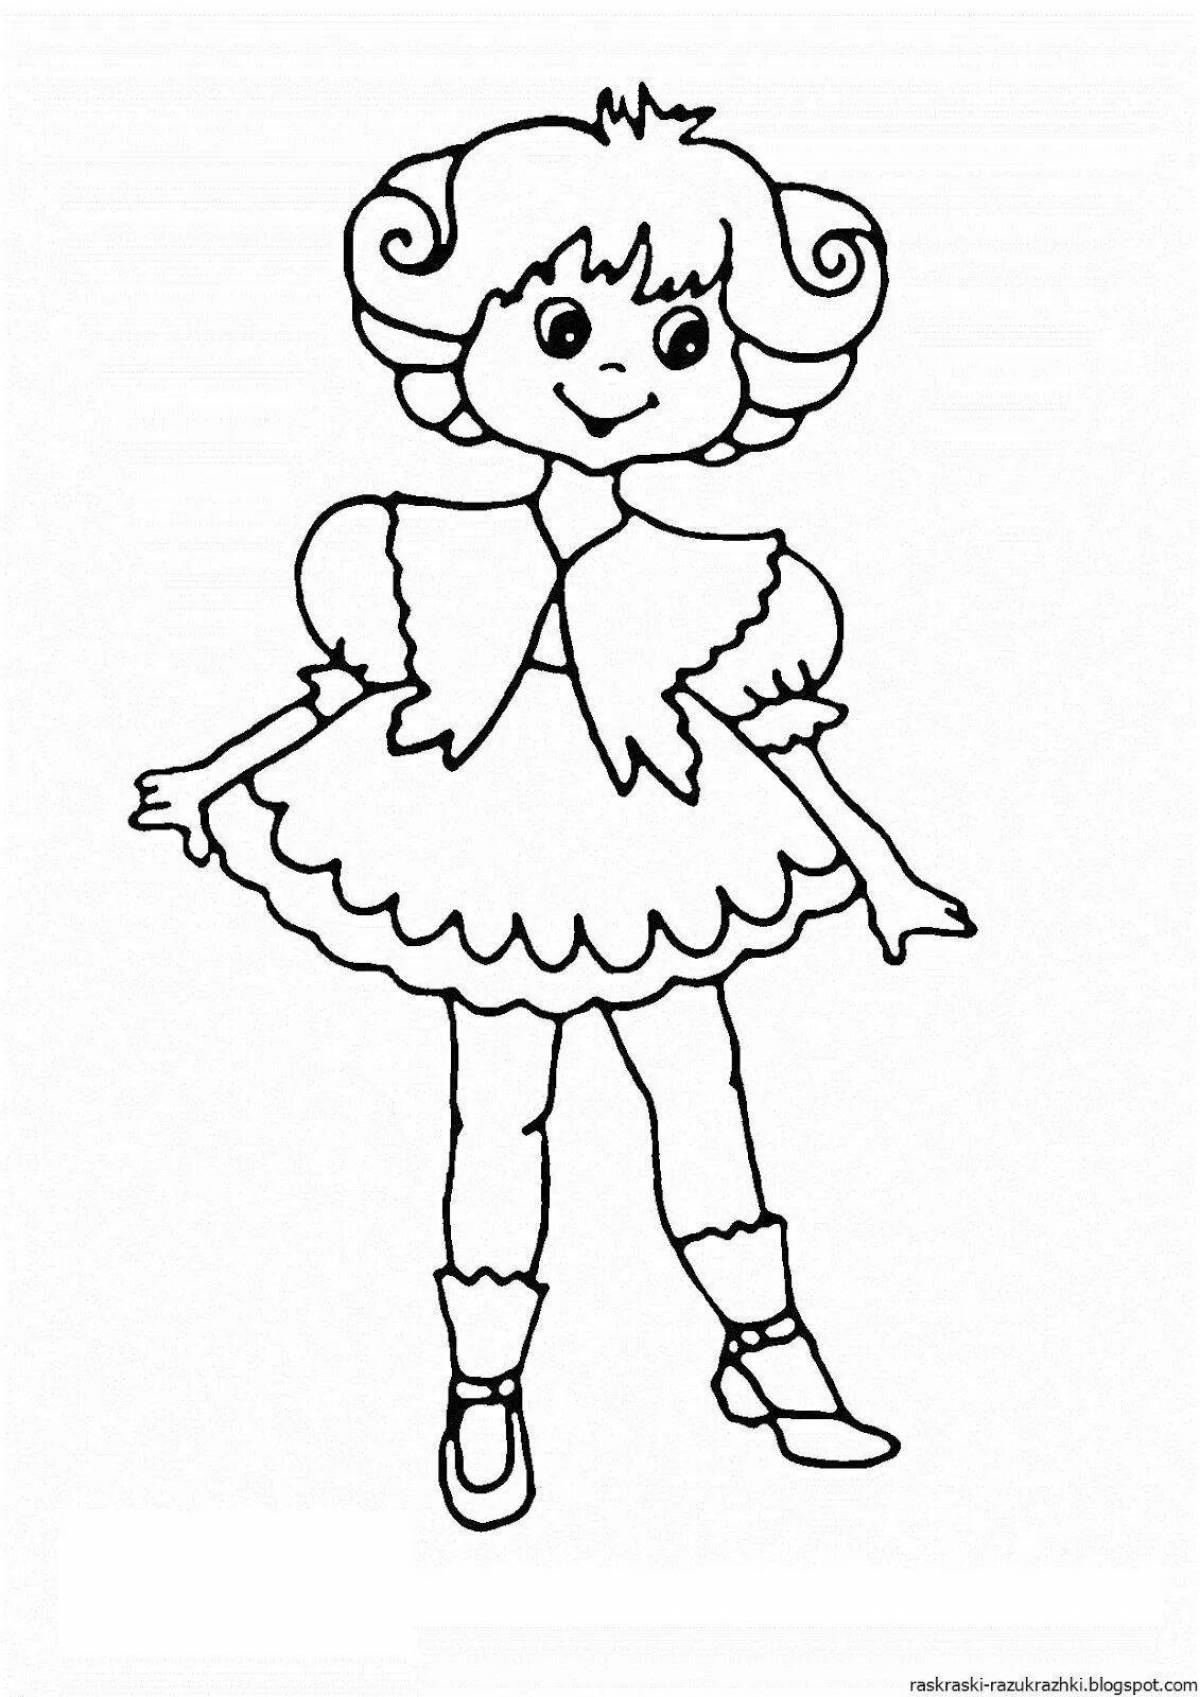 Coloring pages for girls 4 years old